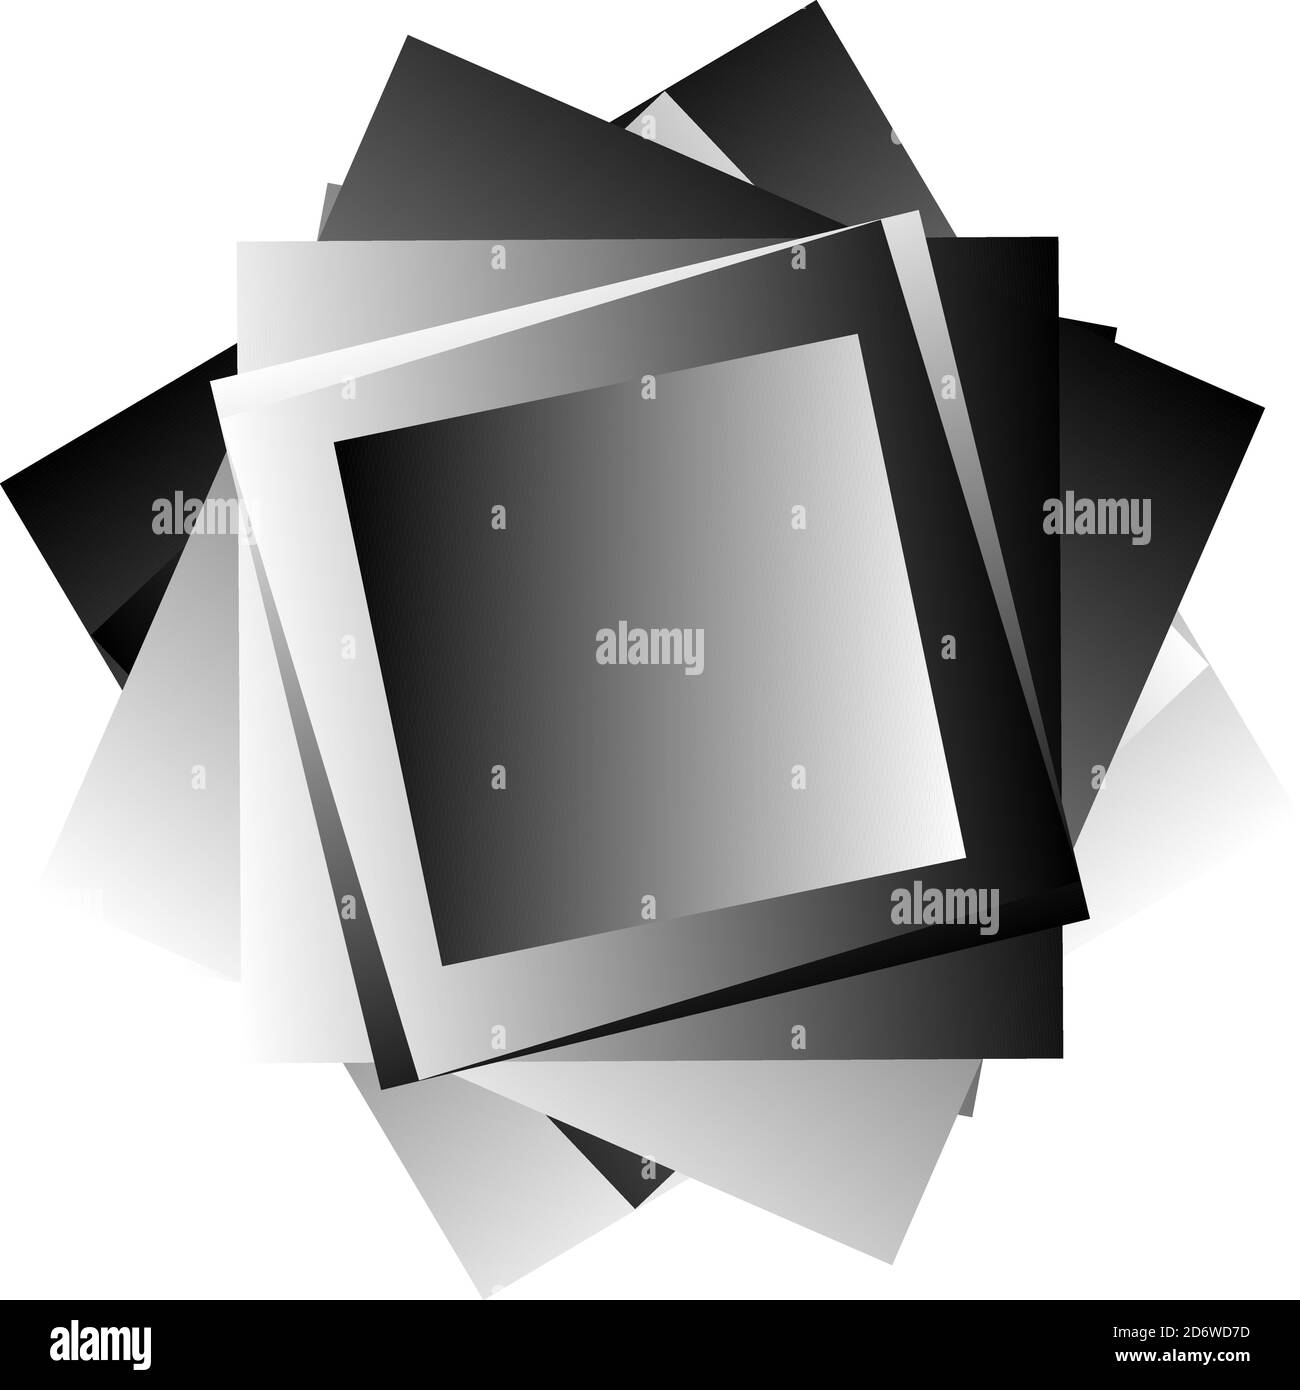 Randxom rotated overlap chaotic Squares vector illustration. Squares spiral stack Stock Vector